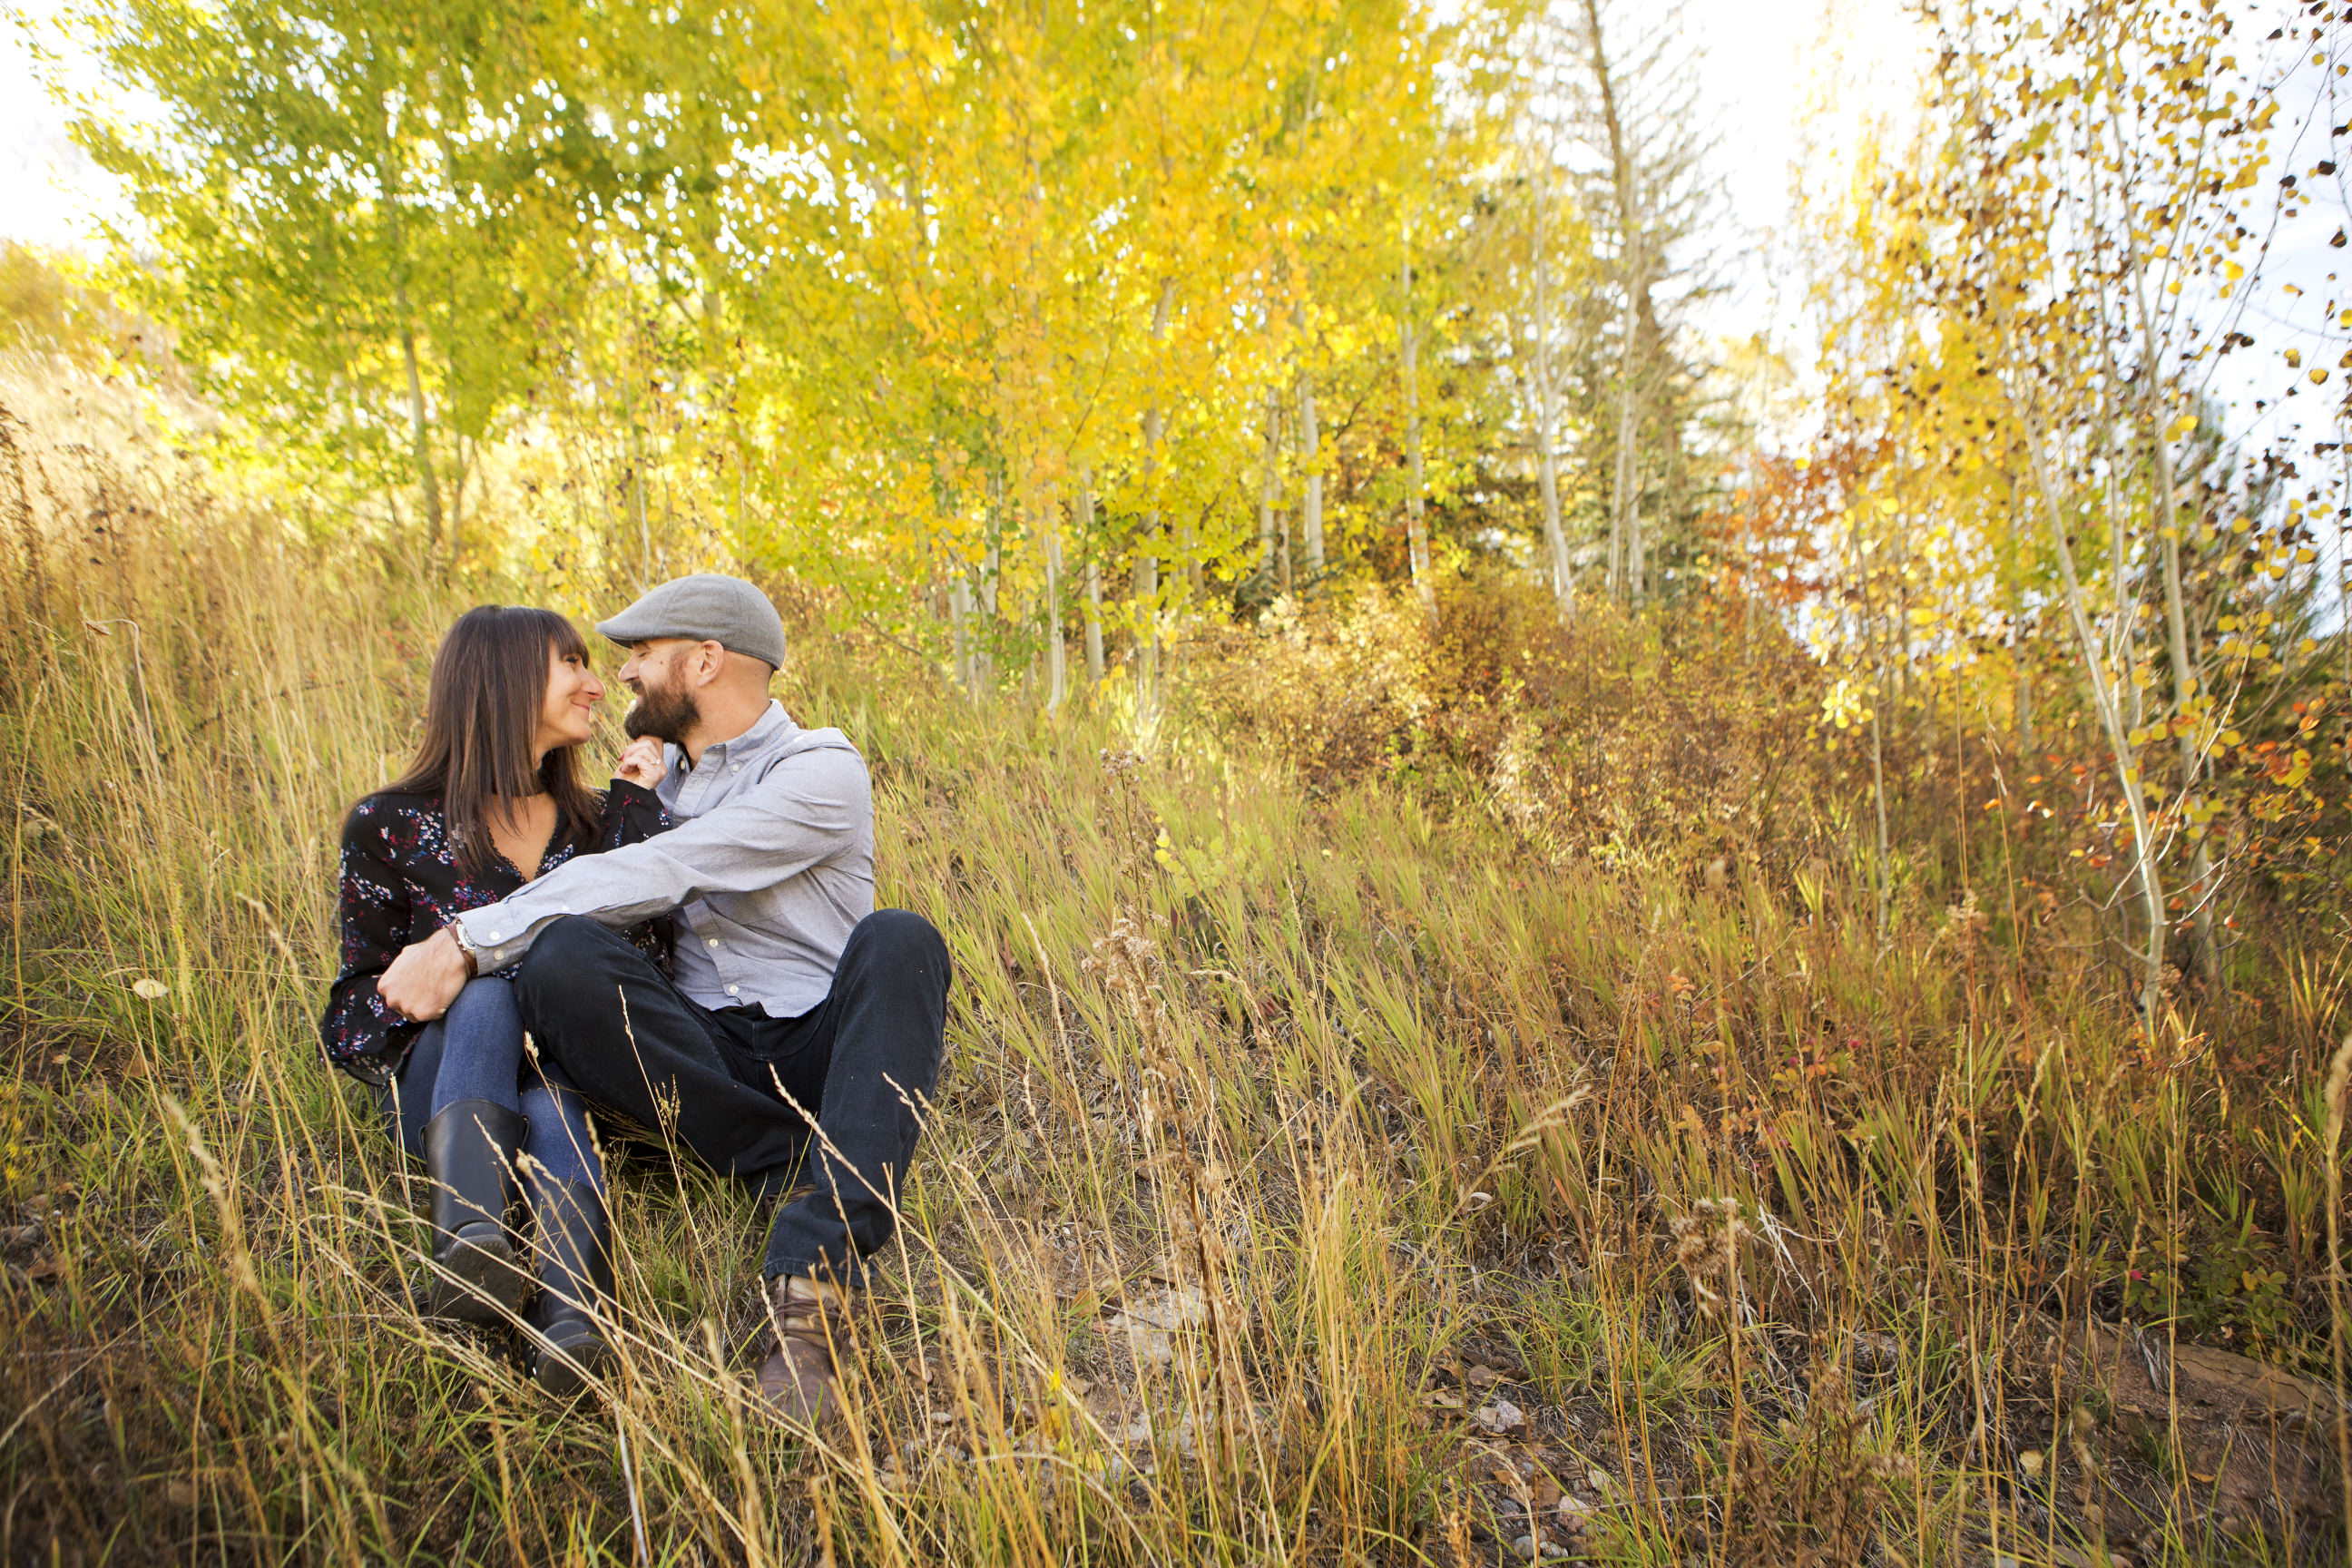 Vail Engagements – Micheal & Emily